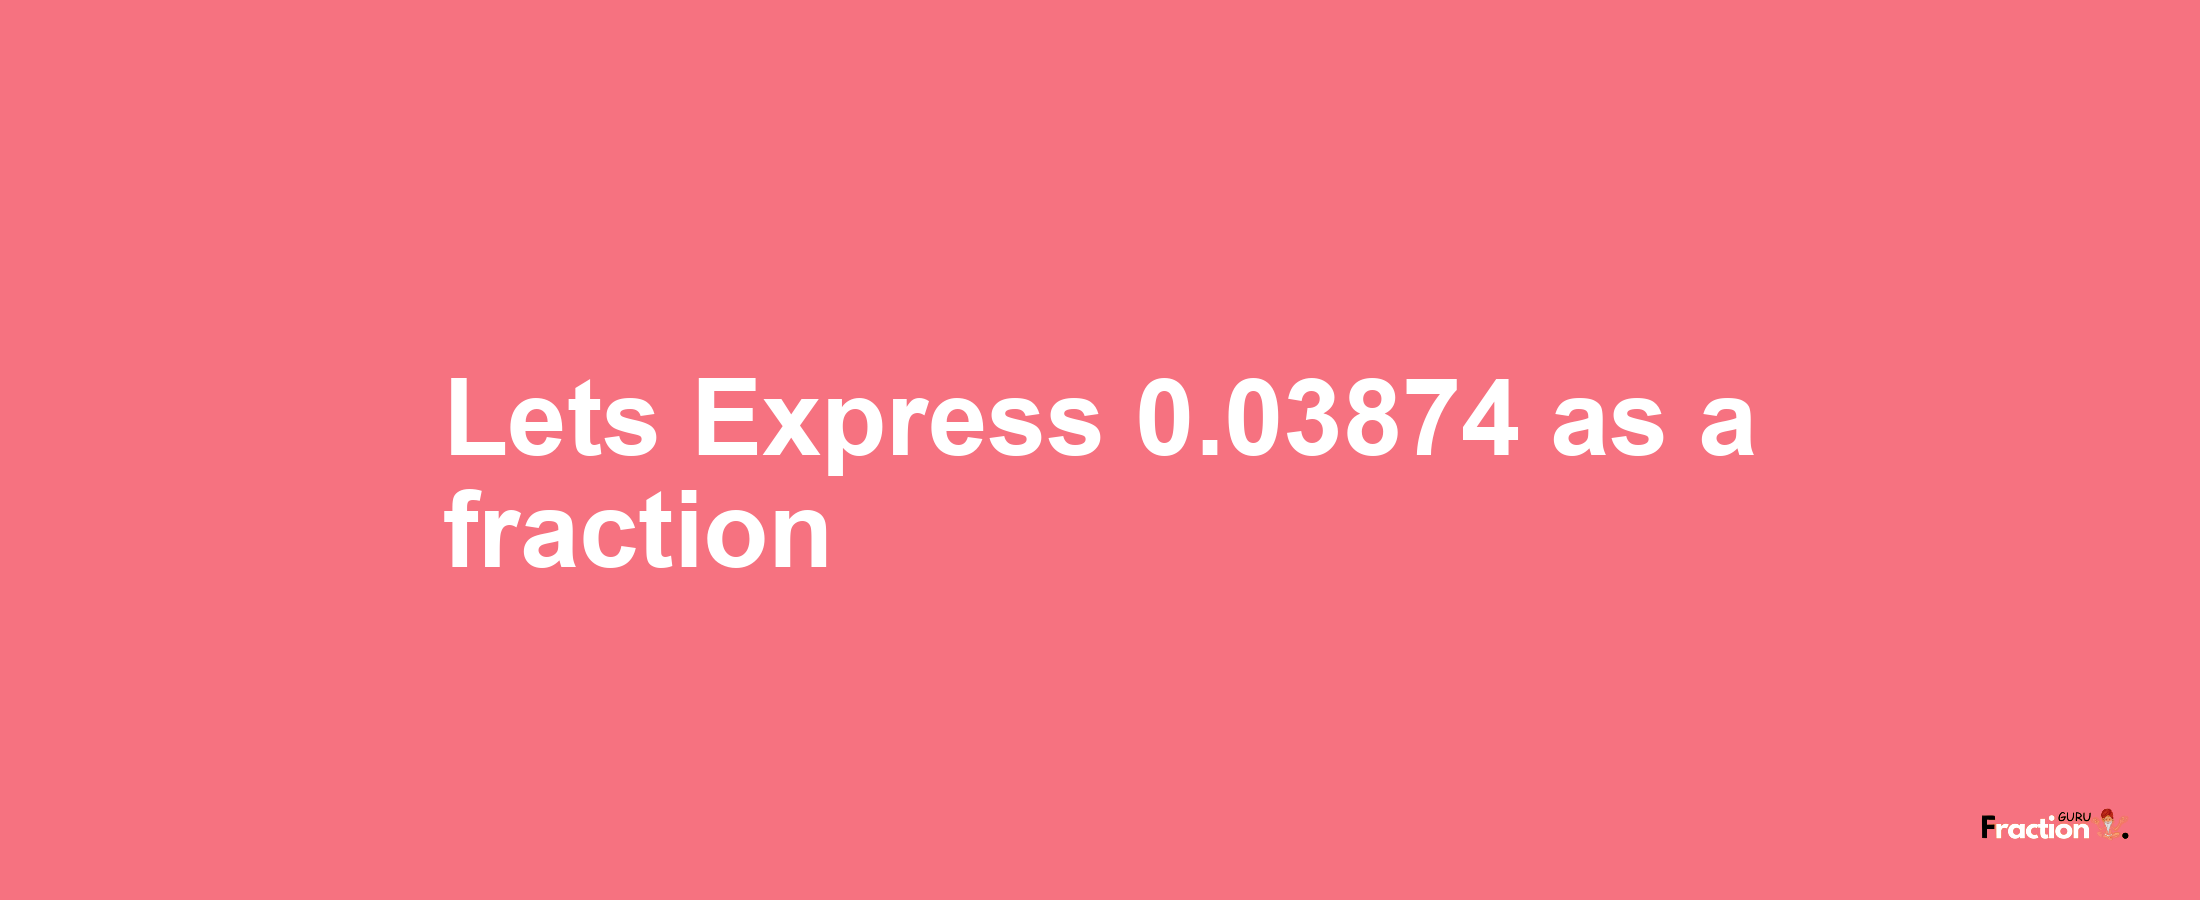 Lets Express 0.03874 as afraction